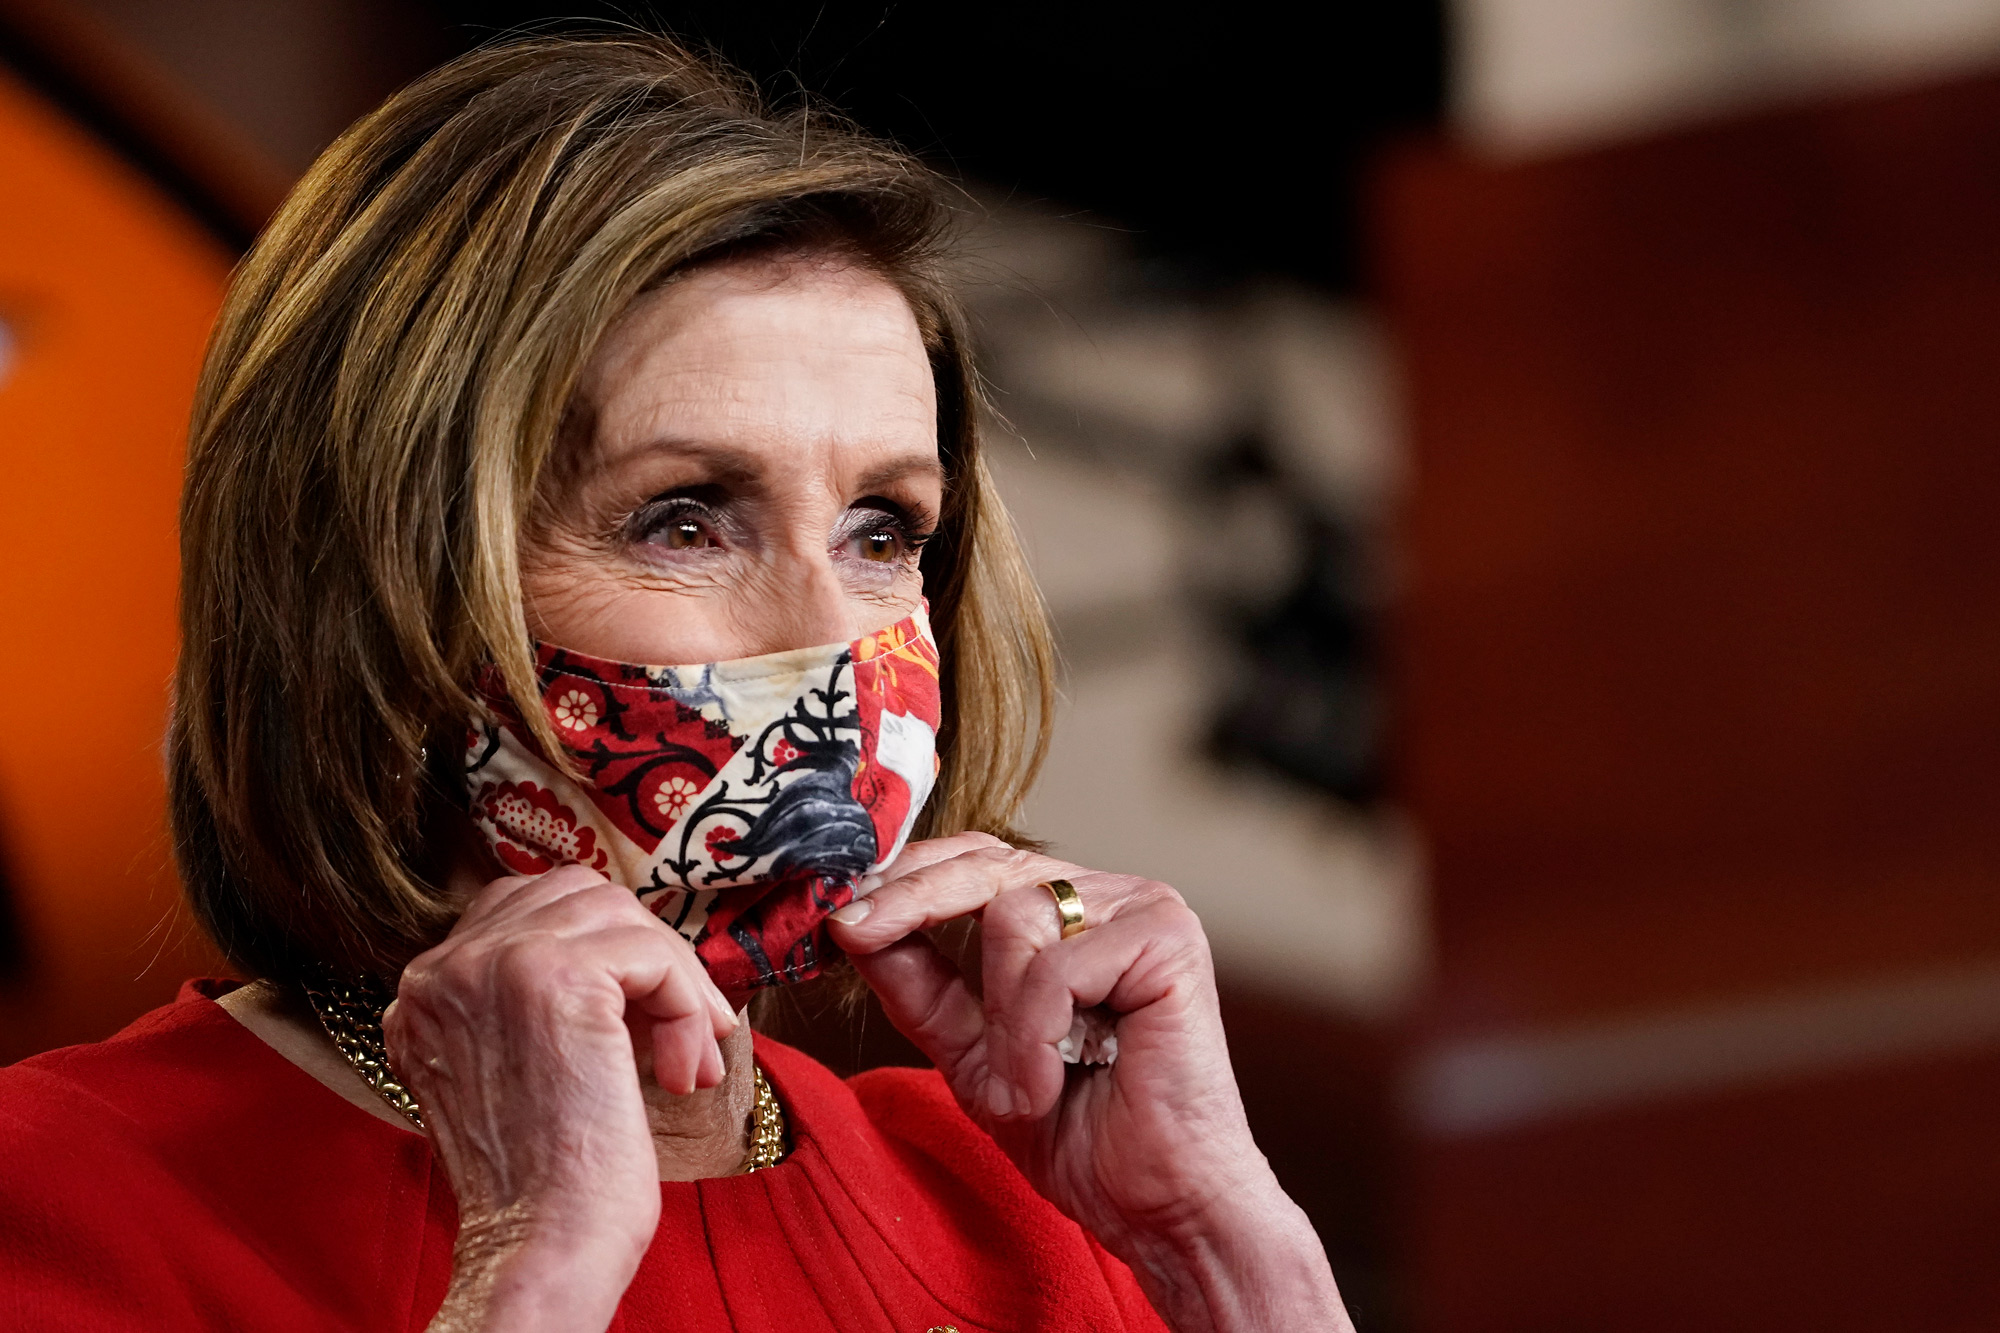 House Speaker Nancy Pelosi puts her mask back on after a news conference on Capitol Hill in Washington, DC, on May 13.